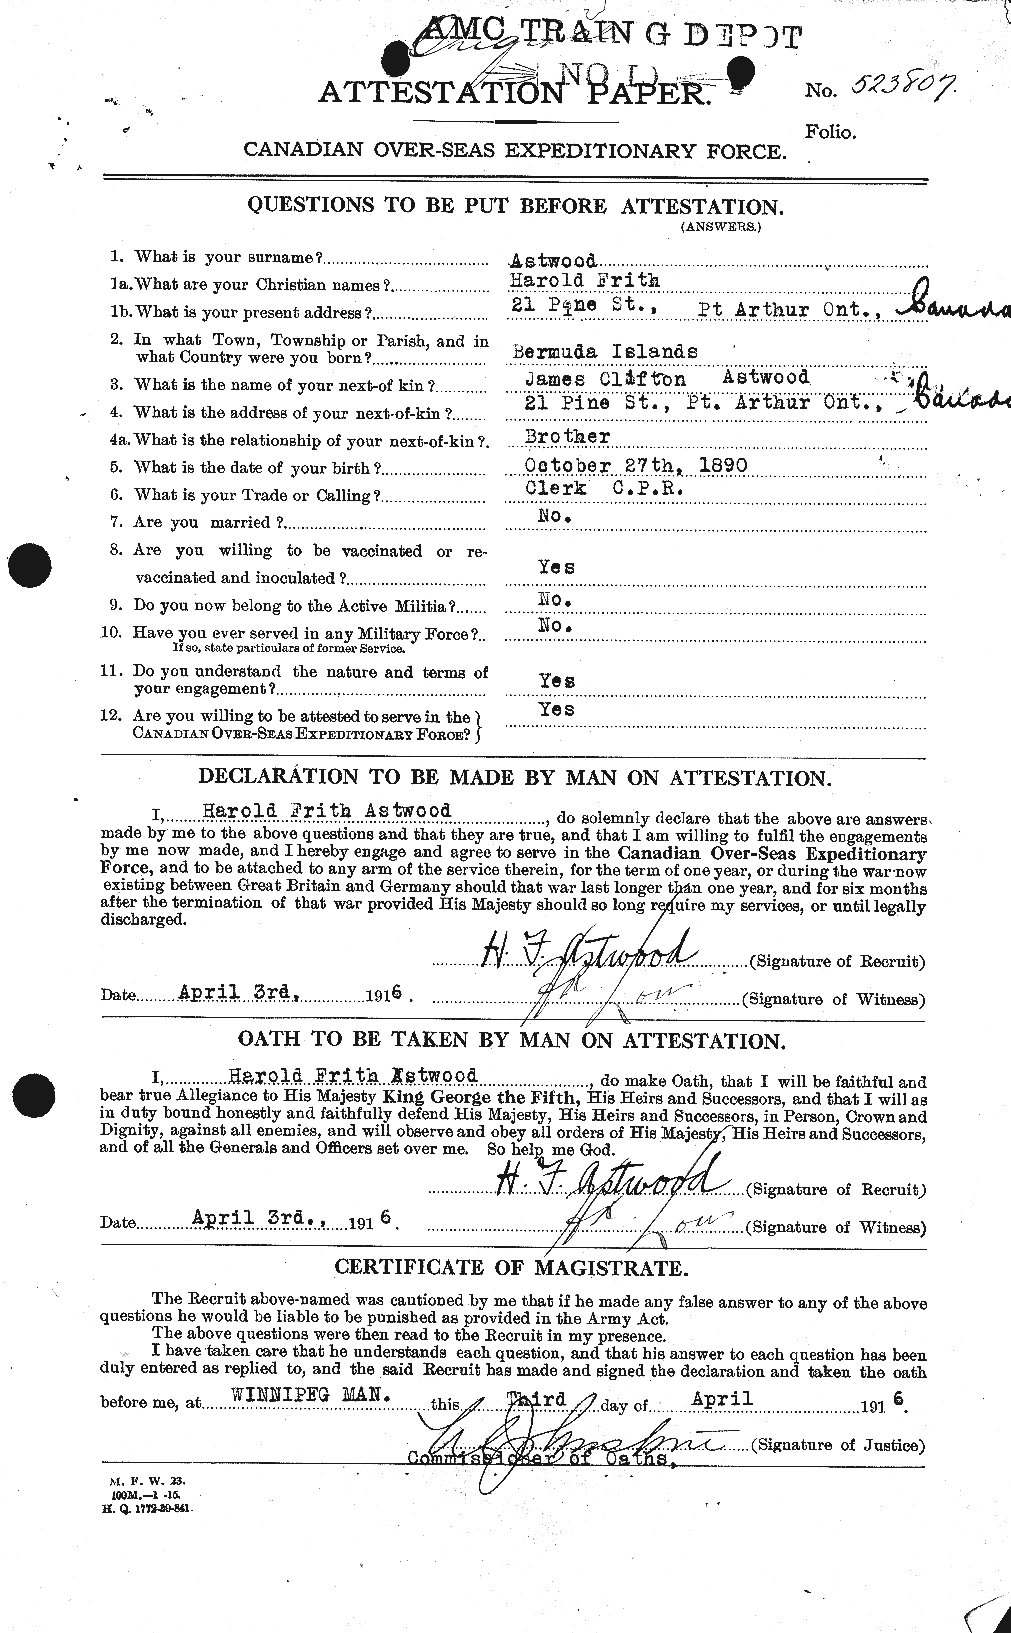 Personnel Records of the First World War - CEF 217061a